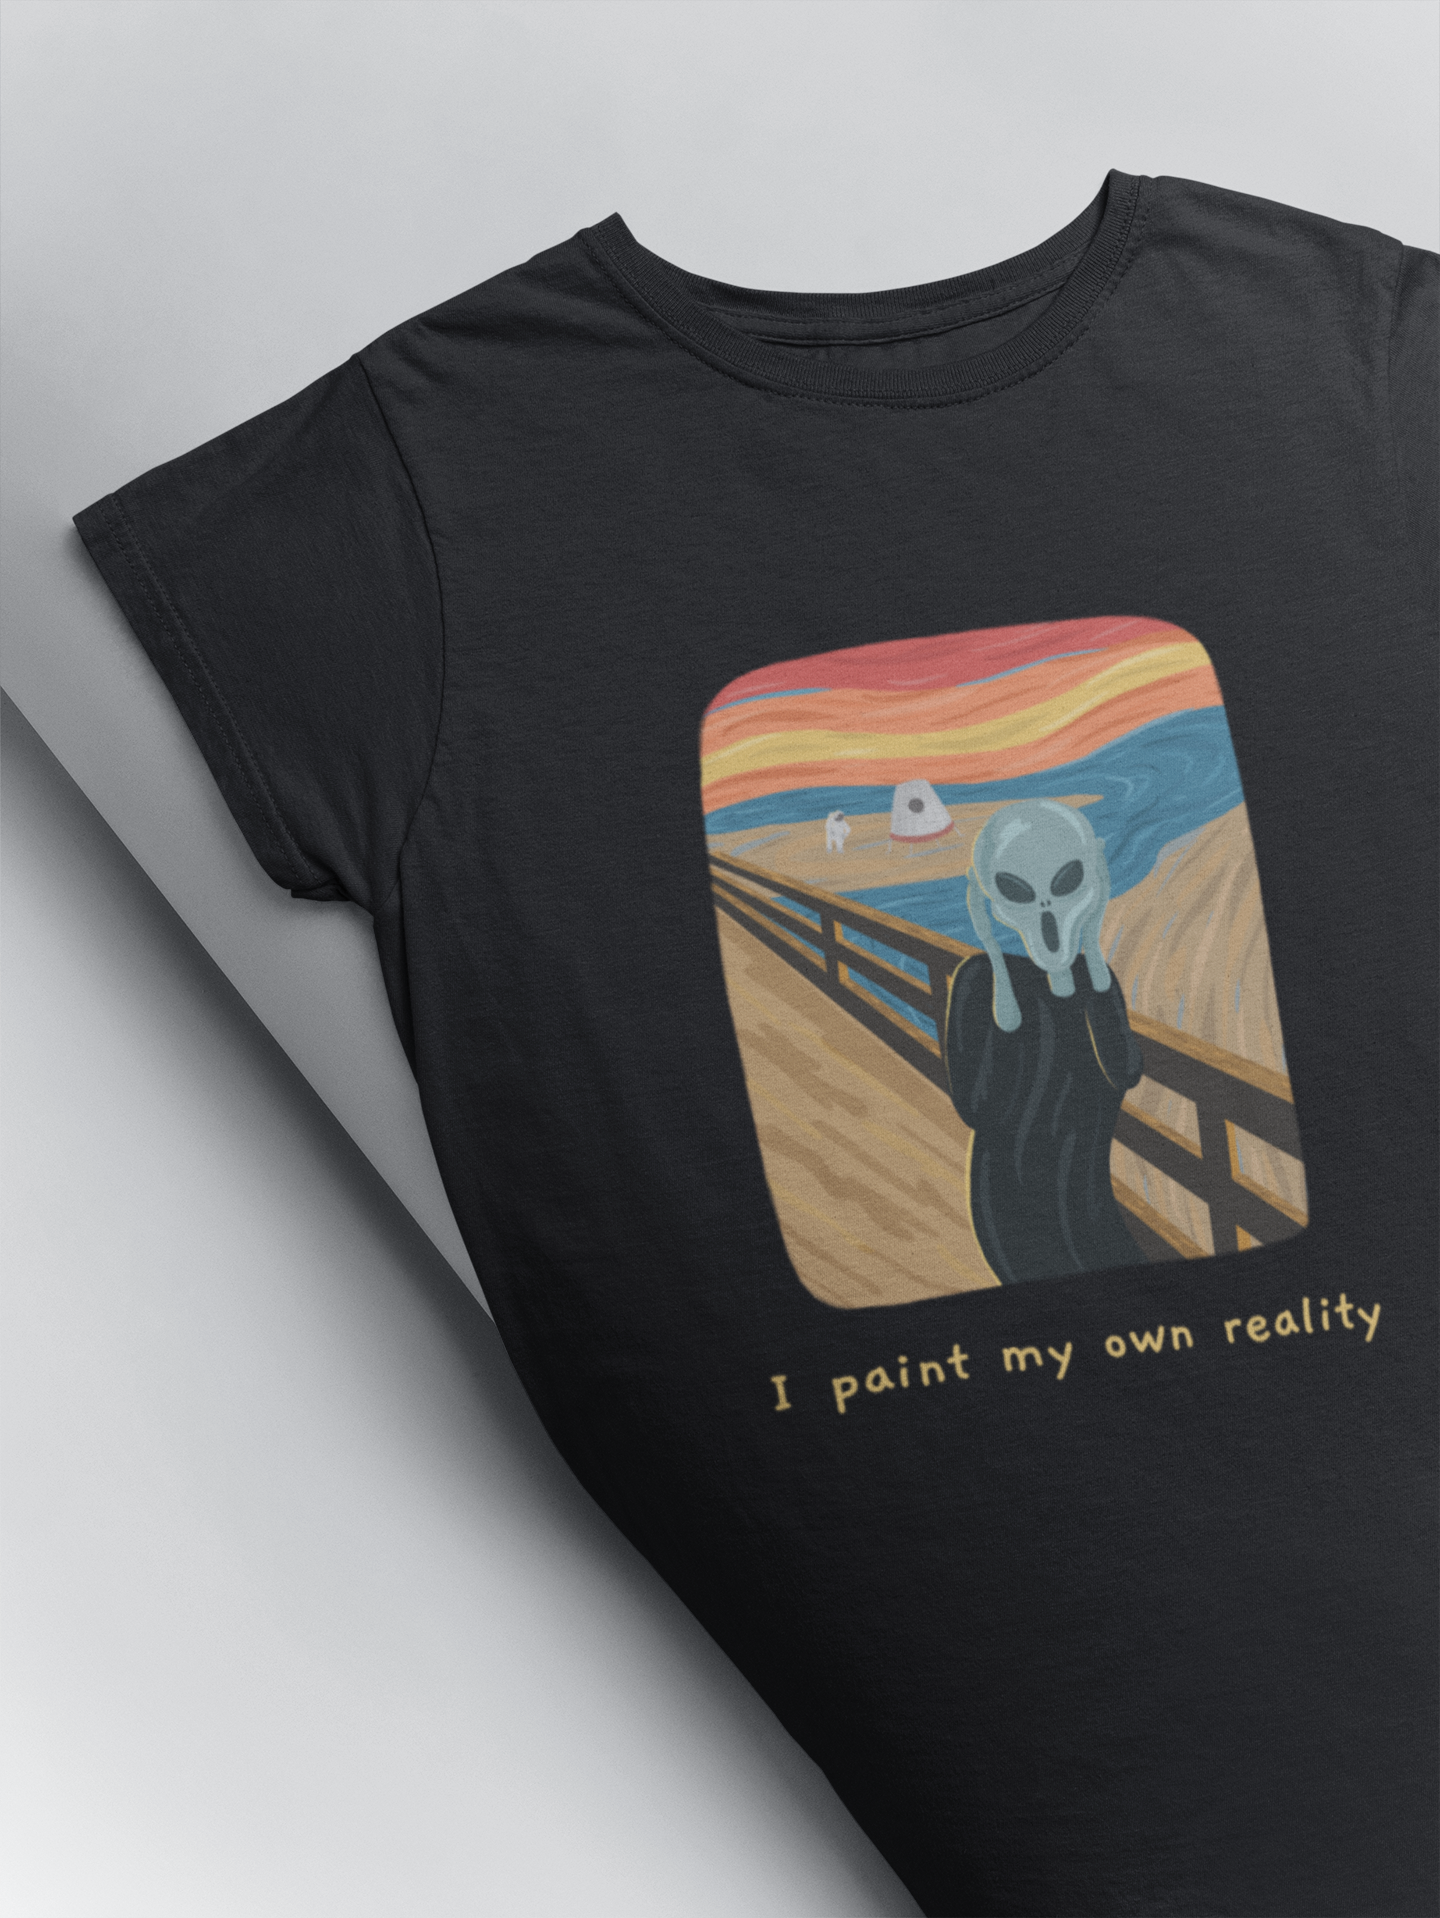 I paint my own reality funny design illustrated printed t shirt in black colour at Muselot